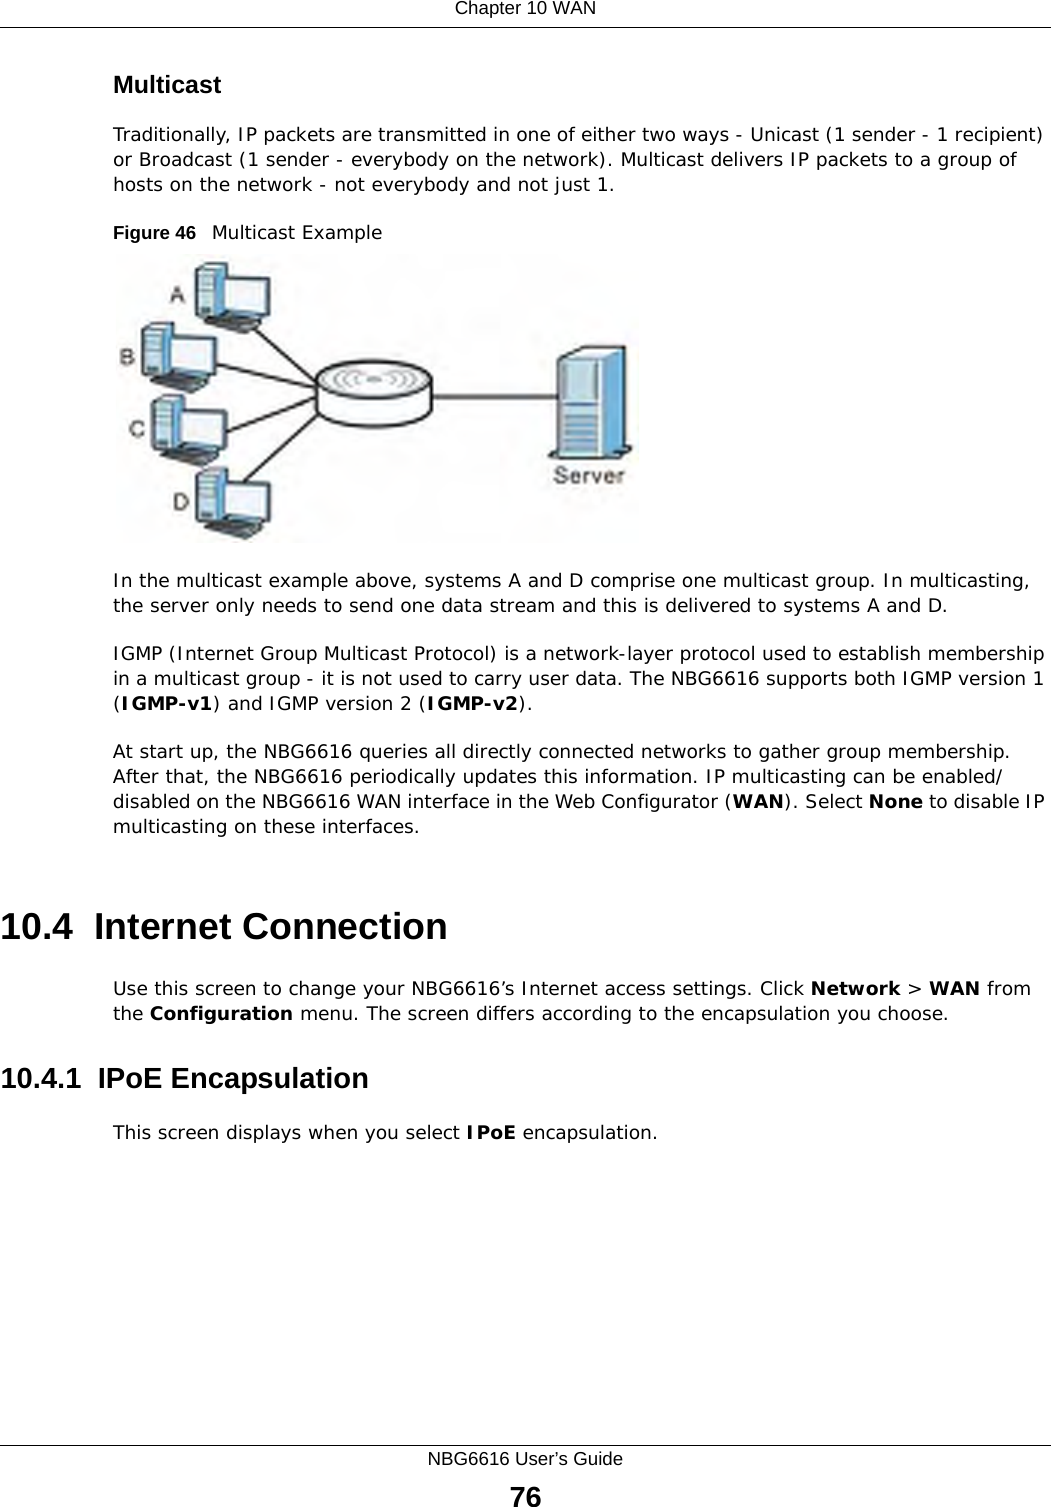 Chapter 10 WANNBG6616 User’s Guide76MulticastTraditionally, IP packets are transmitted in one of either two ways - Unicast (1 sender - 1 recipient) or Broadcast (1 sender - everybody on the network). Multicast delivers IP packets to a group of hosts on the network - not everybody and not just 1. Figure 46   Multicast ExampleIn the multicast example above, systems A and D comprise one multicast group. In multicasting, the server only needs to send one data stream and this is delivered to systems A and D. IGMP (Internet Group Multicast Protocol) is a network-layer protocol used to establish membership in a multicast group - it is not used to carry user data. The NBG6616 supports both IGMP version 1 (IGMP-v1) and IGMP version 2 (IGMP-v2). At start up, the NBG6616 queries all directly connected networks to gather group membership. After that, the NBG6616 periodically updates this information. IP multicasting can be enabled/disabled on the NBG6616 WAN interface in the Web Configurator (WAN). Select None to disable IP multicasting on these interfaces.10.4  Internet ConnectionUse this screen to change your NBG6616’s Internet access settings. Click Network &gt; WAN from the Configuration menu. The screen differs according to the encapsulation you choose.10.4.1  IPoE EncapsulationThis screen displays when you select IPoE encapsulation.